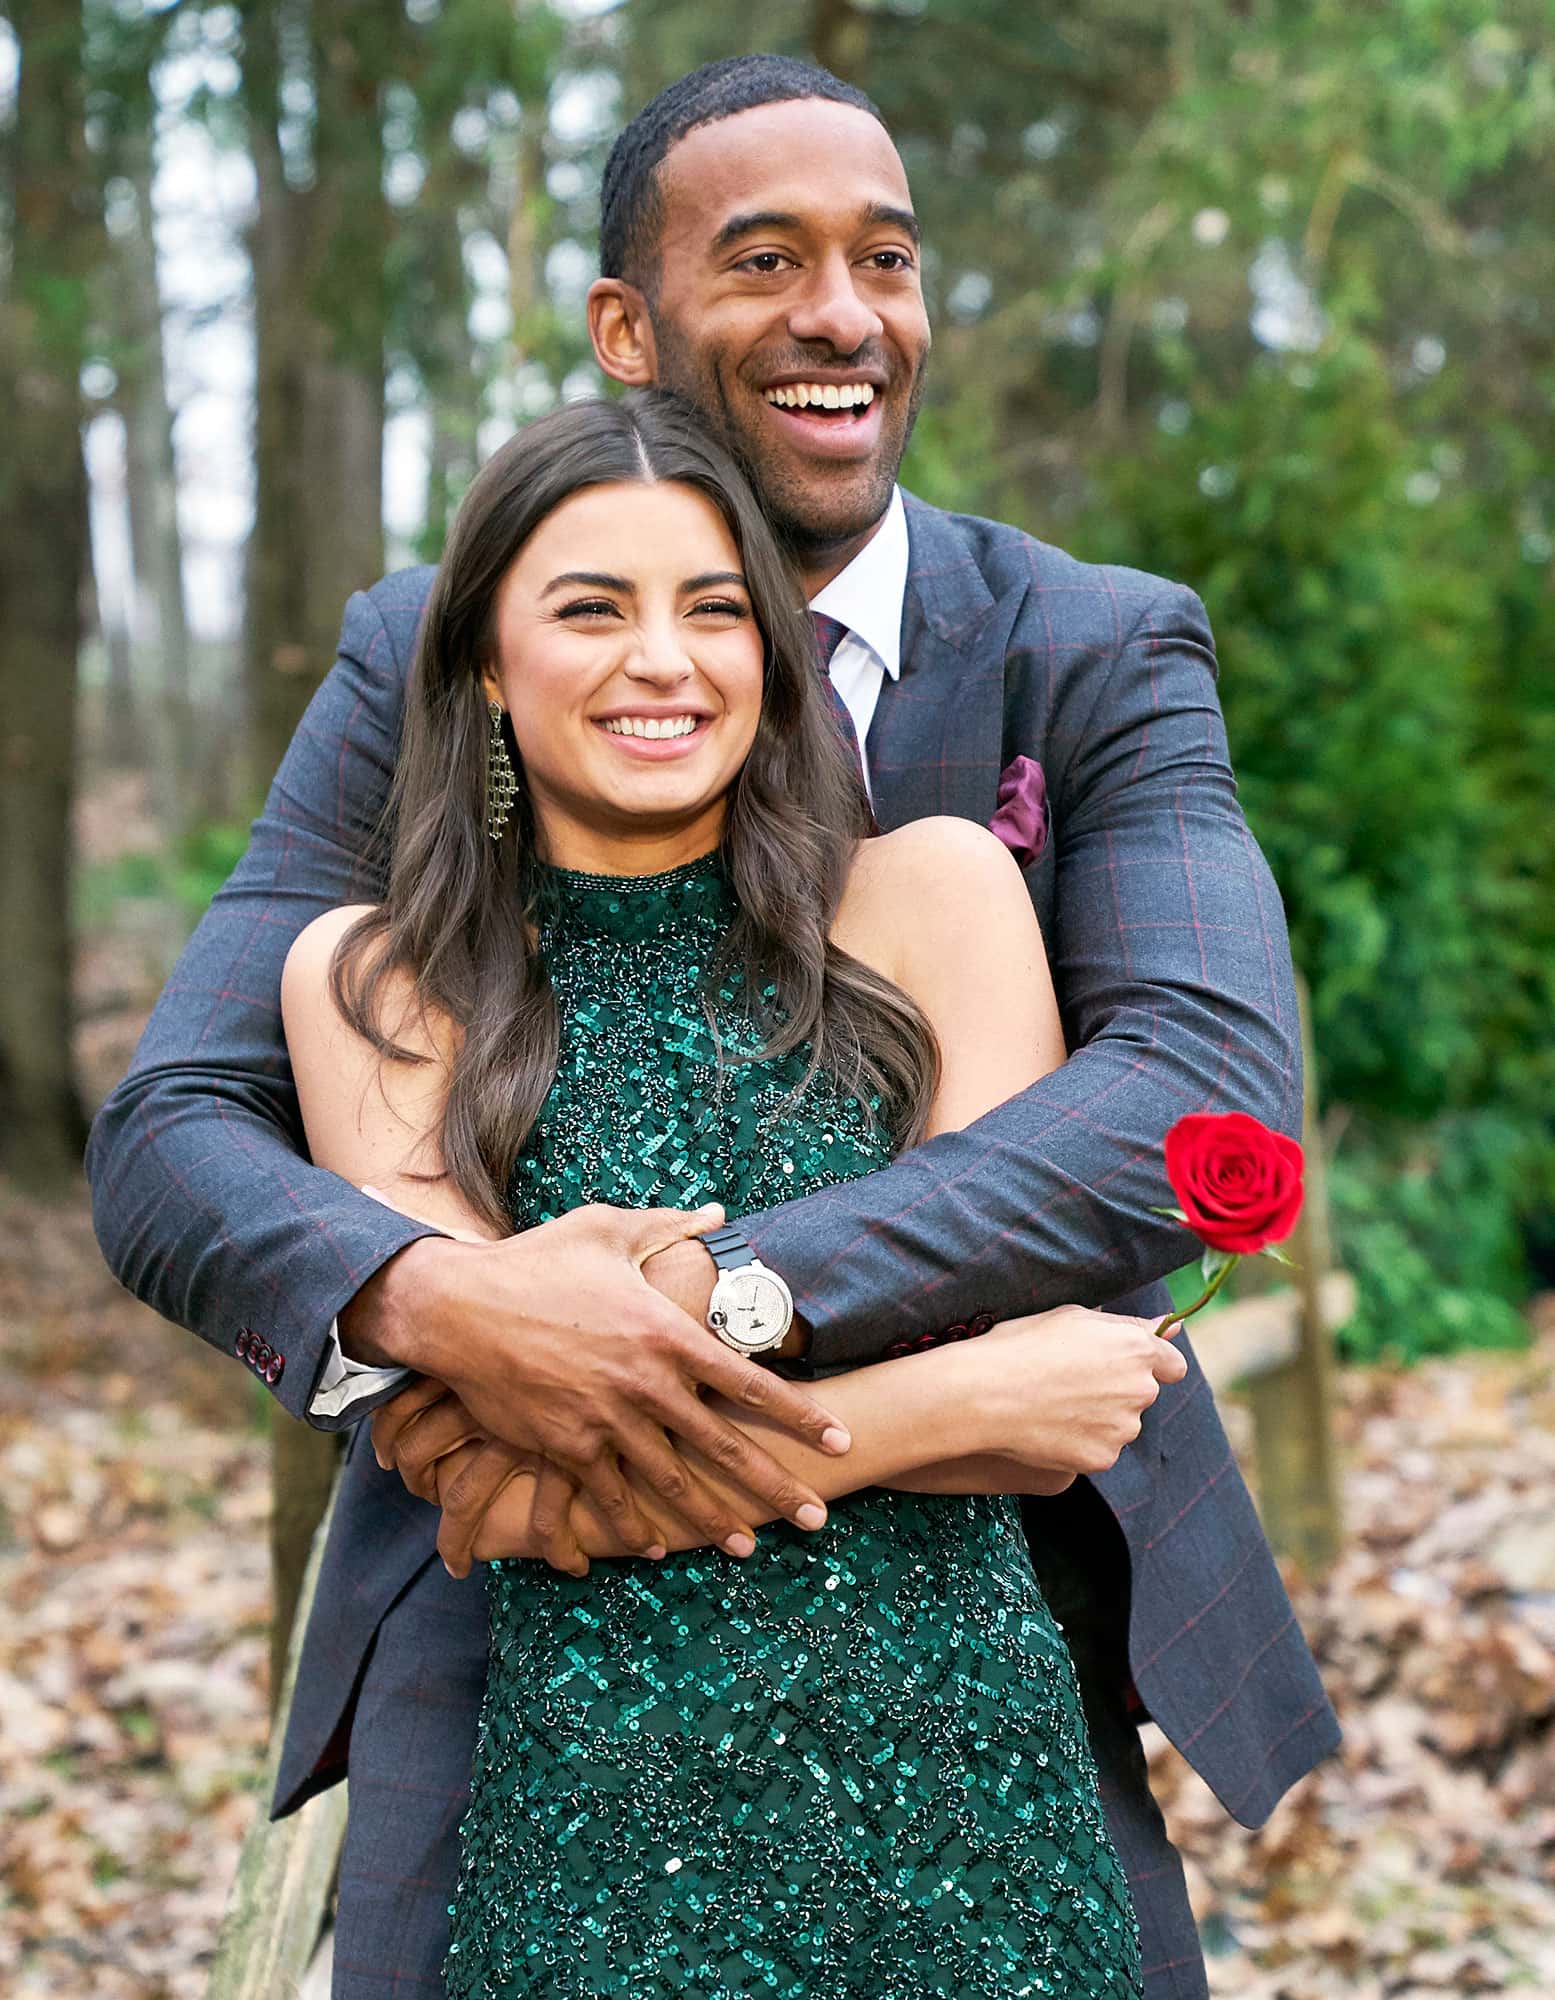 The Bachelor Confronts Its History With Racism and Looks to a Diverse Future